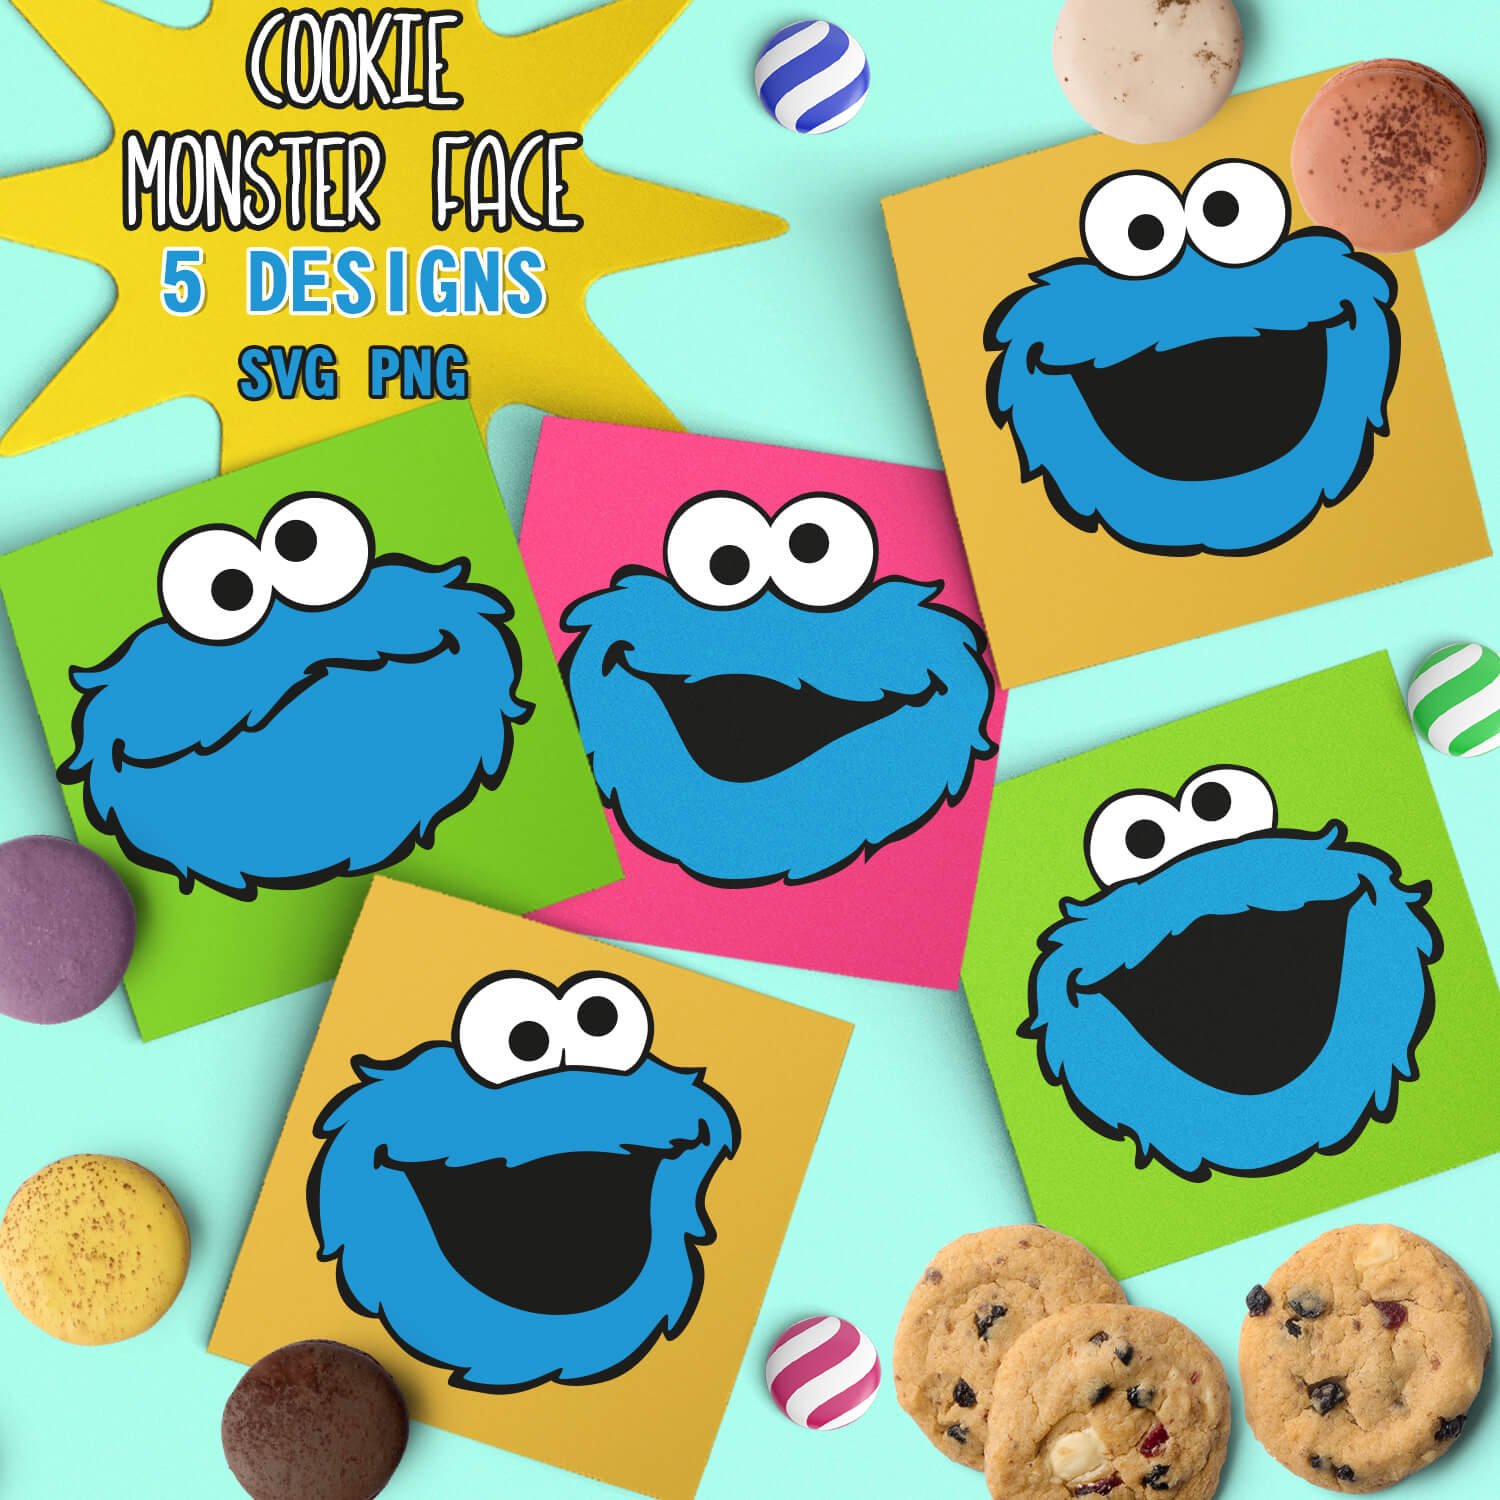 Cookie Monster Face - 5 Designs.